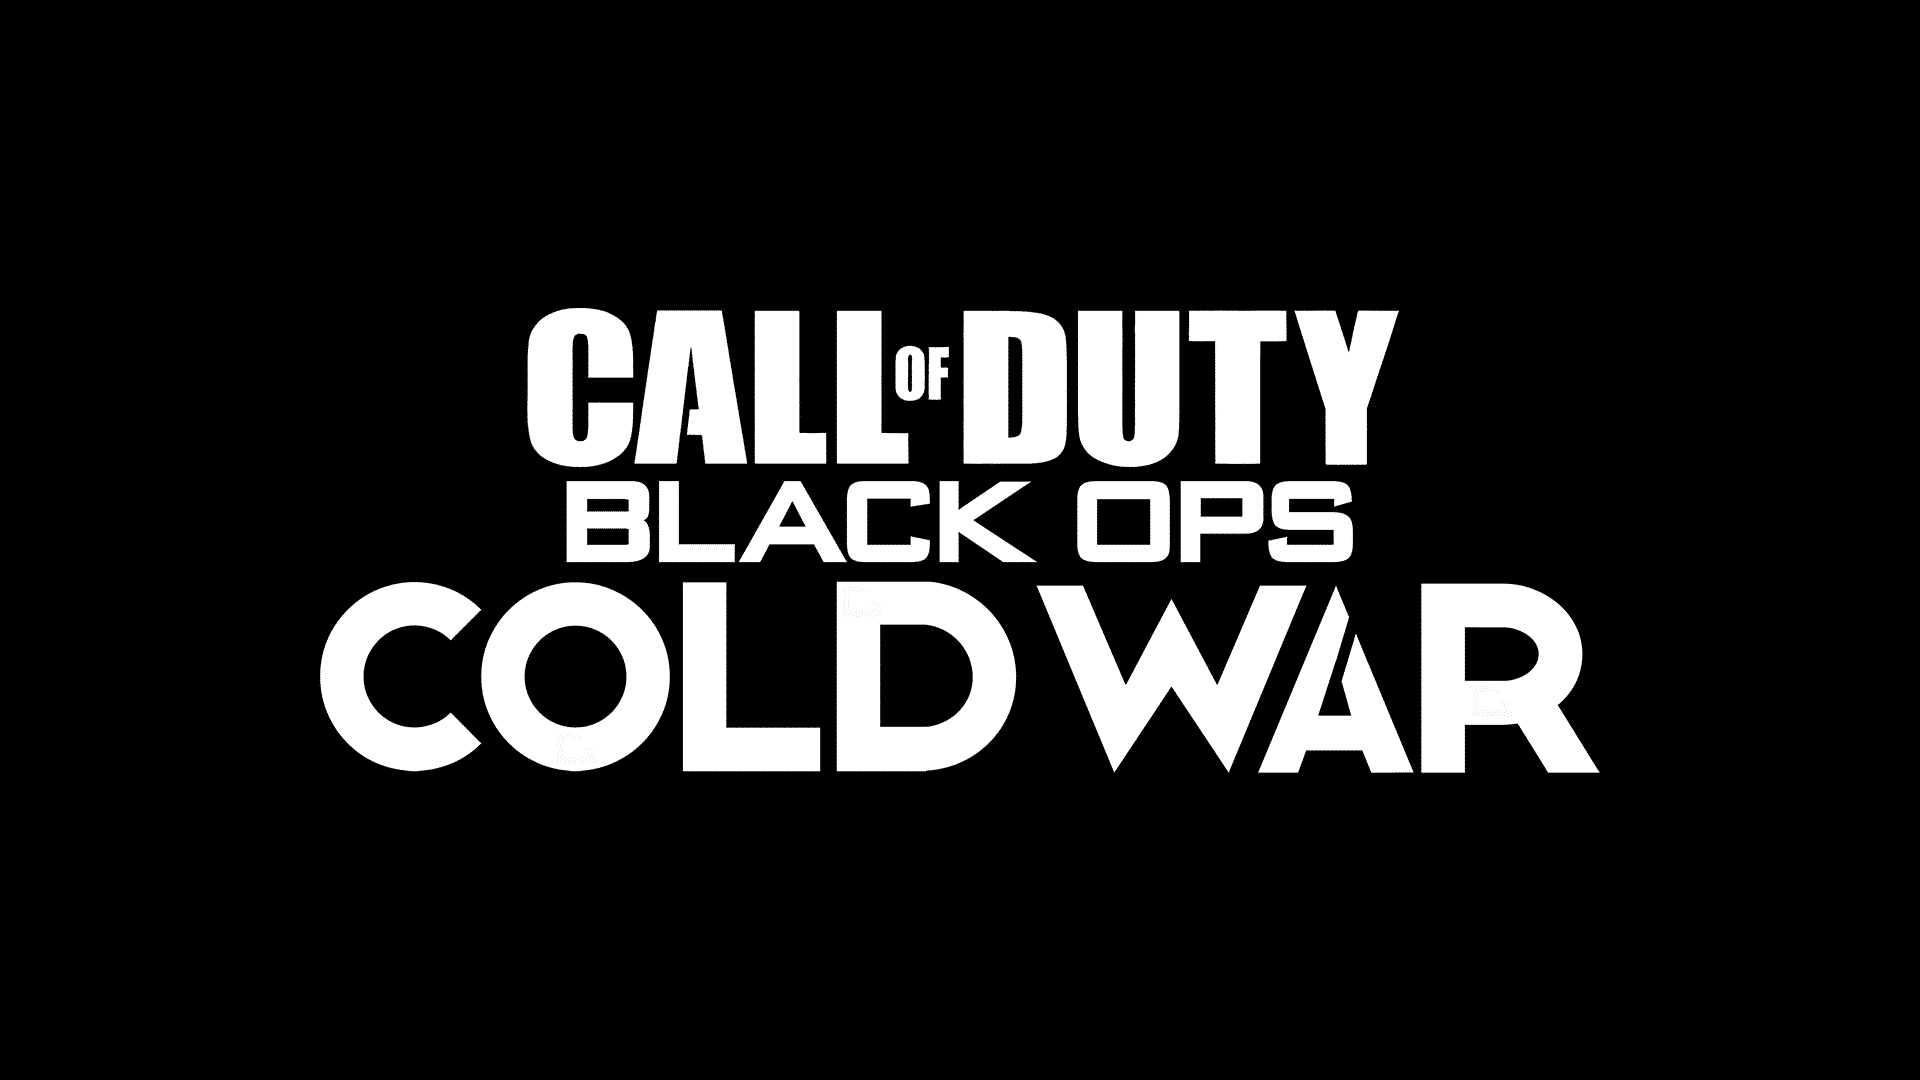 Call of Duty Black Ops Cold War Teaser, Full Reveal in Warzone Aug 26